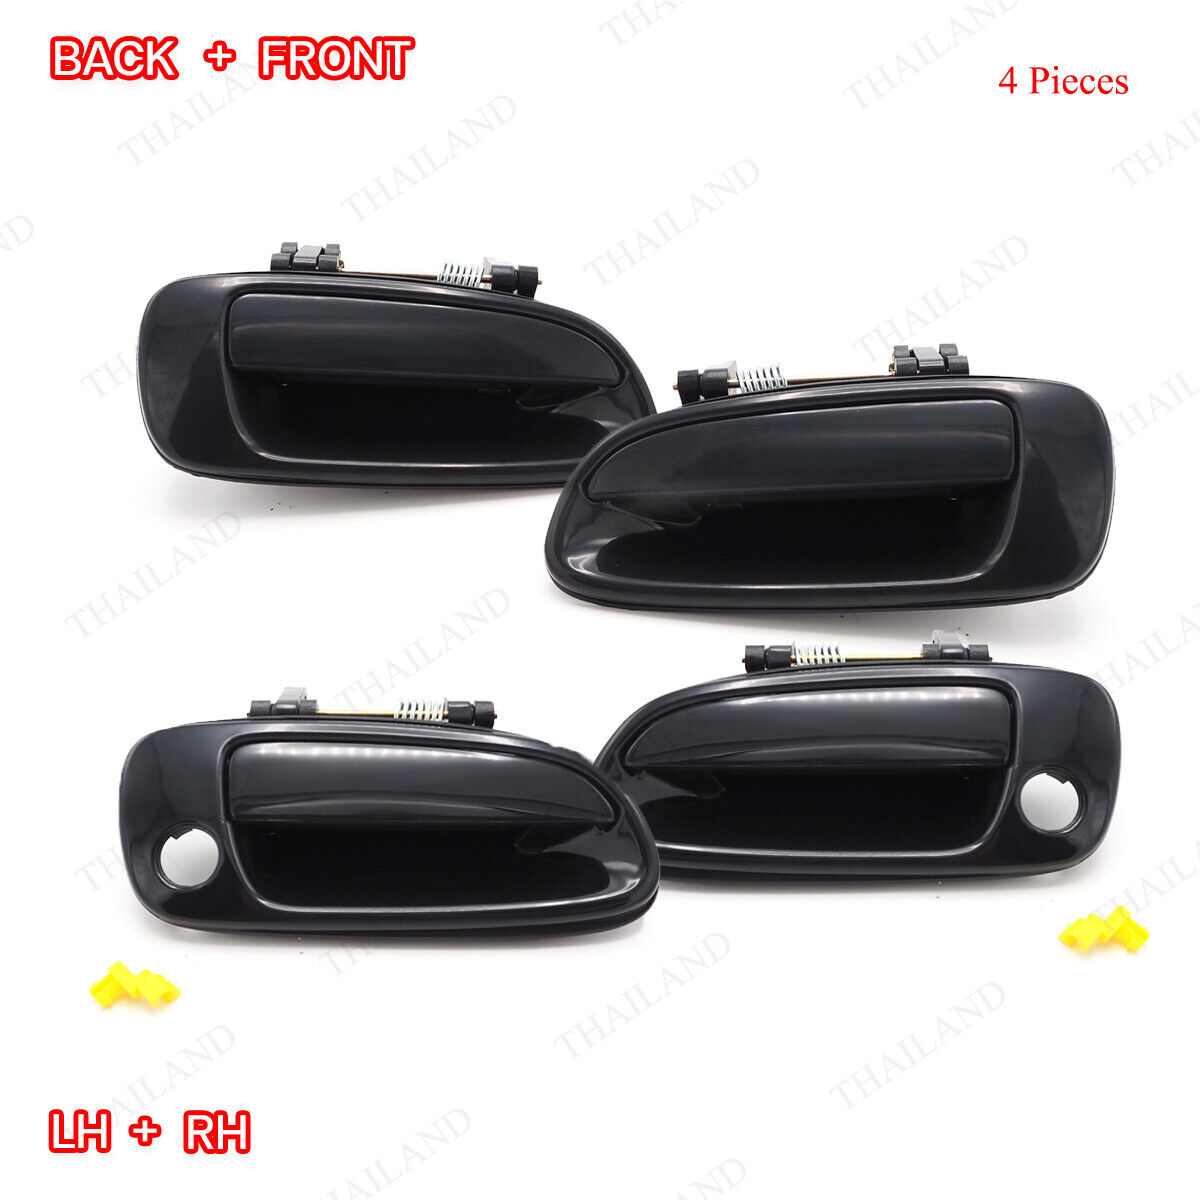 Fits Toyota Corona Carina AT ST191 CT190 1992 - '95 Set 4Dr Outer Door Handle